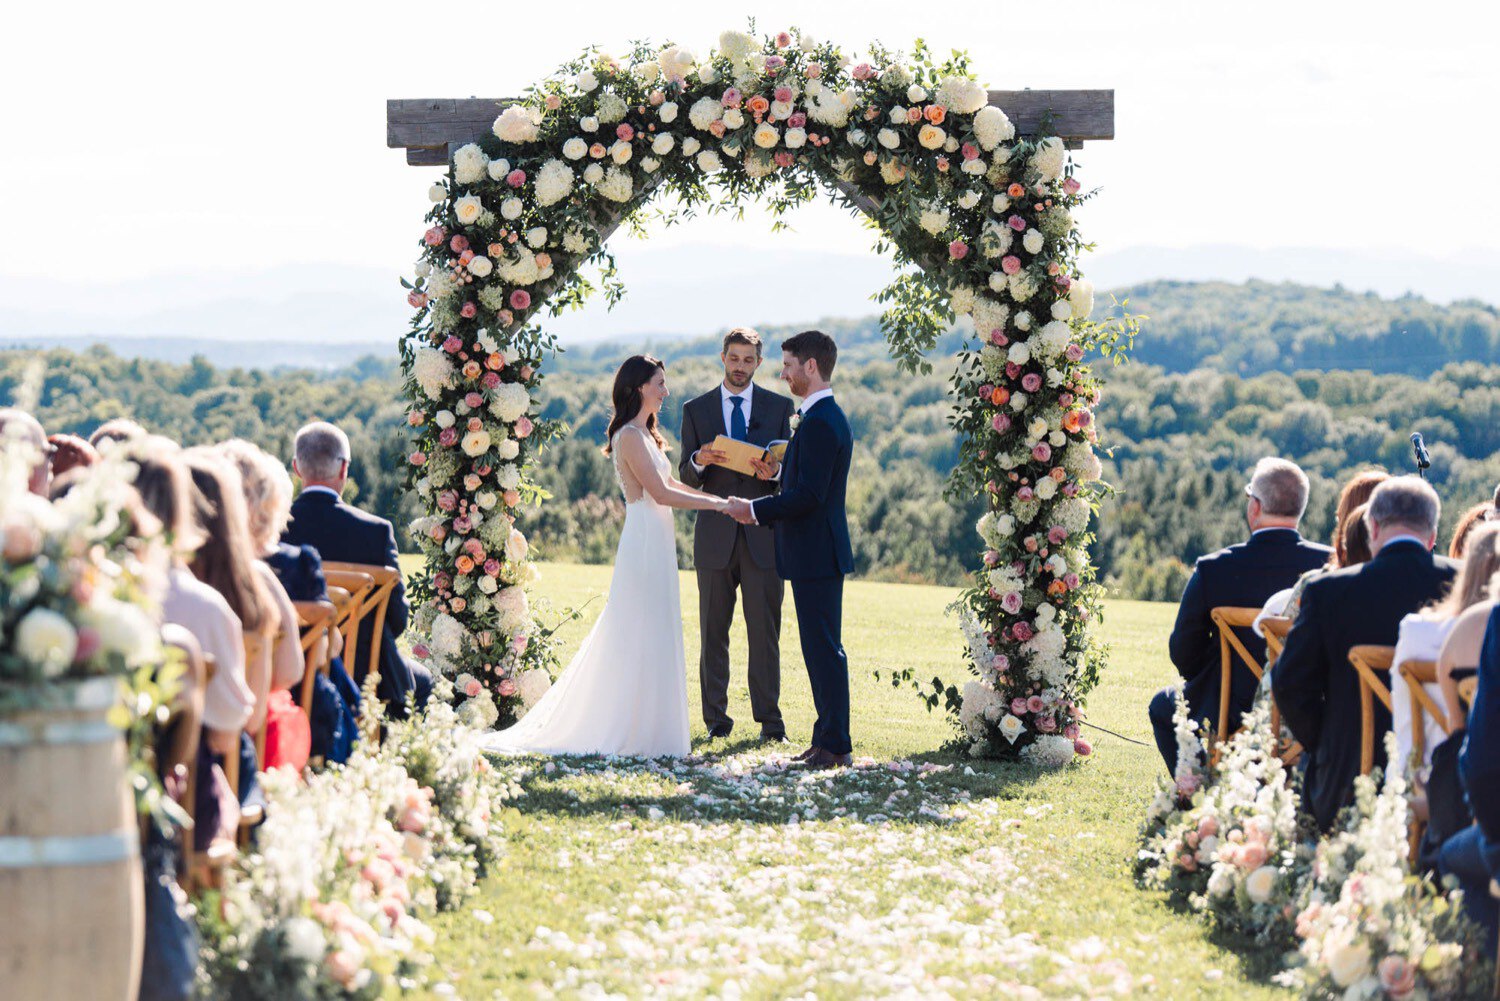 Officiant weds couple in outdoor summer wedding ceremony with lush floral arch by clayton floral